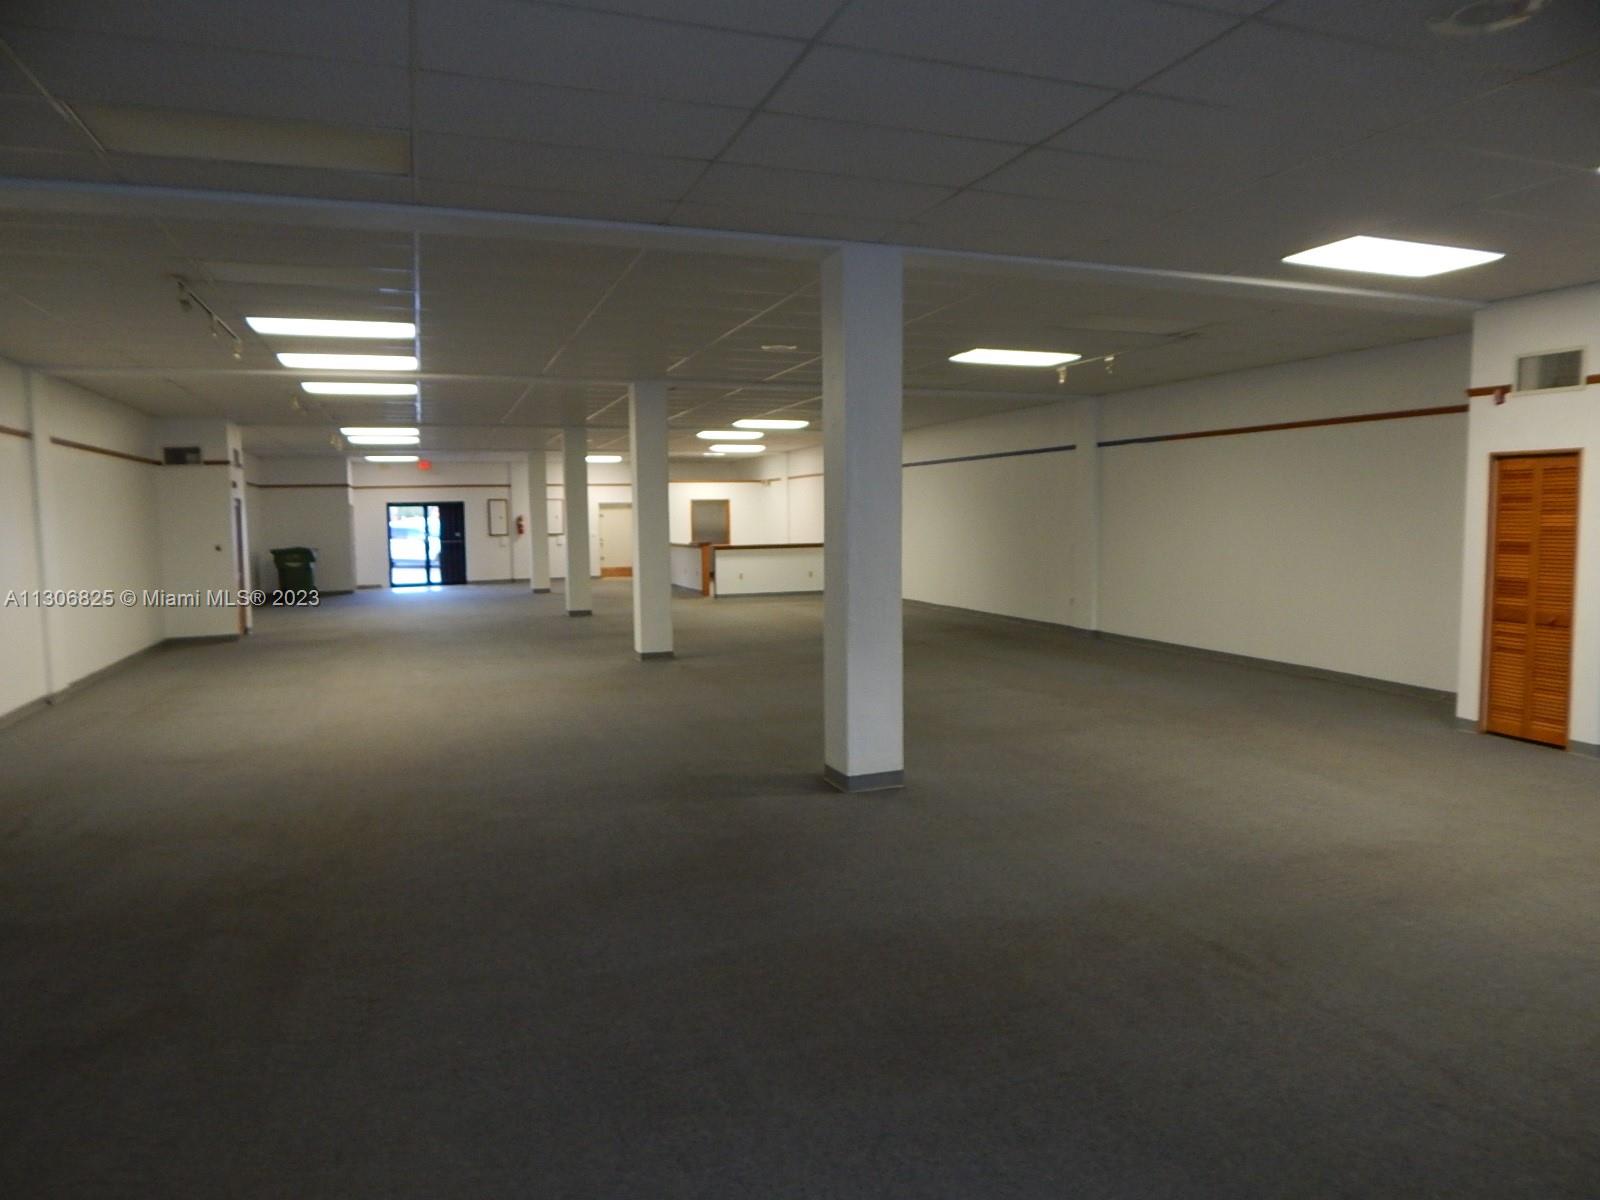 5,600 SQ. FT. OPEN SPACE